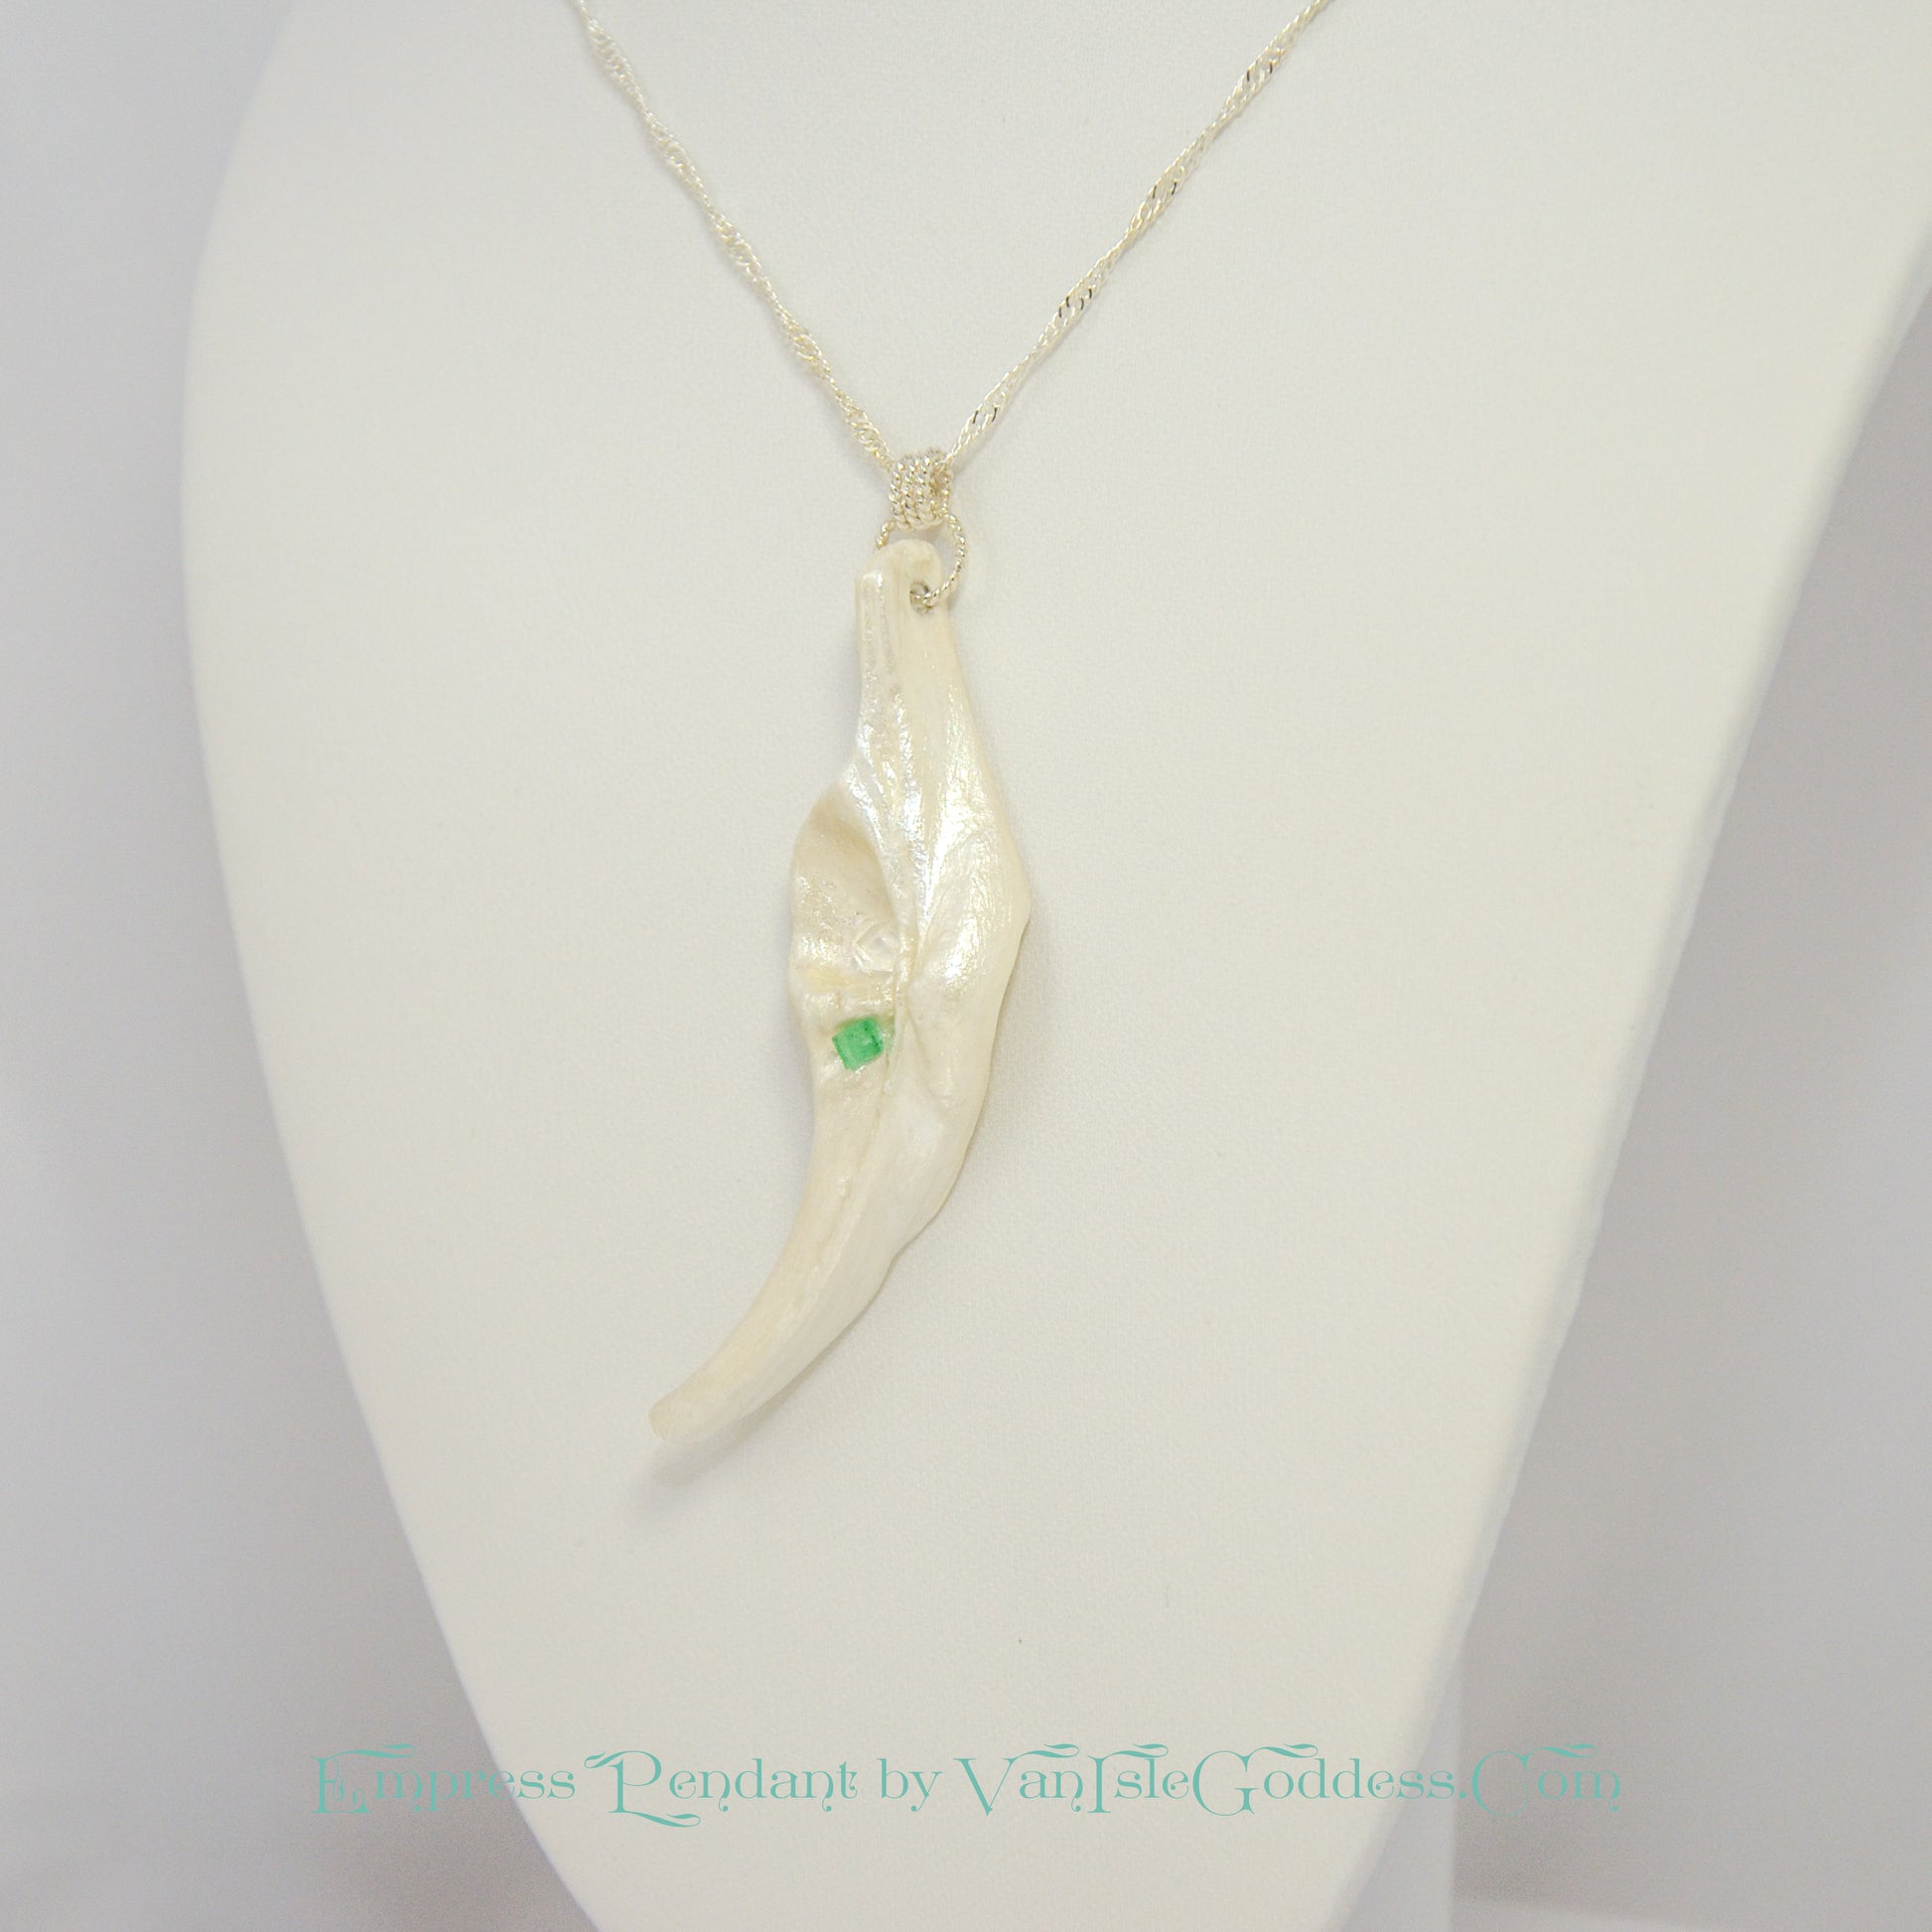 Empress natural seashell pendant with a Herkimer Diamond and Emerald. The pendant is turned to one side so the viewer can see what it looks like.